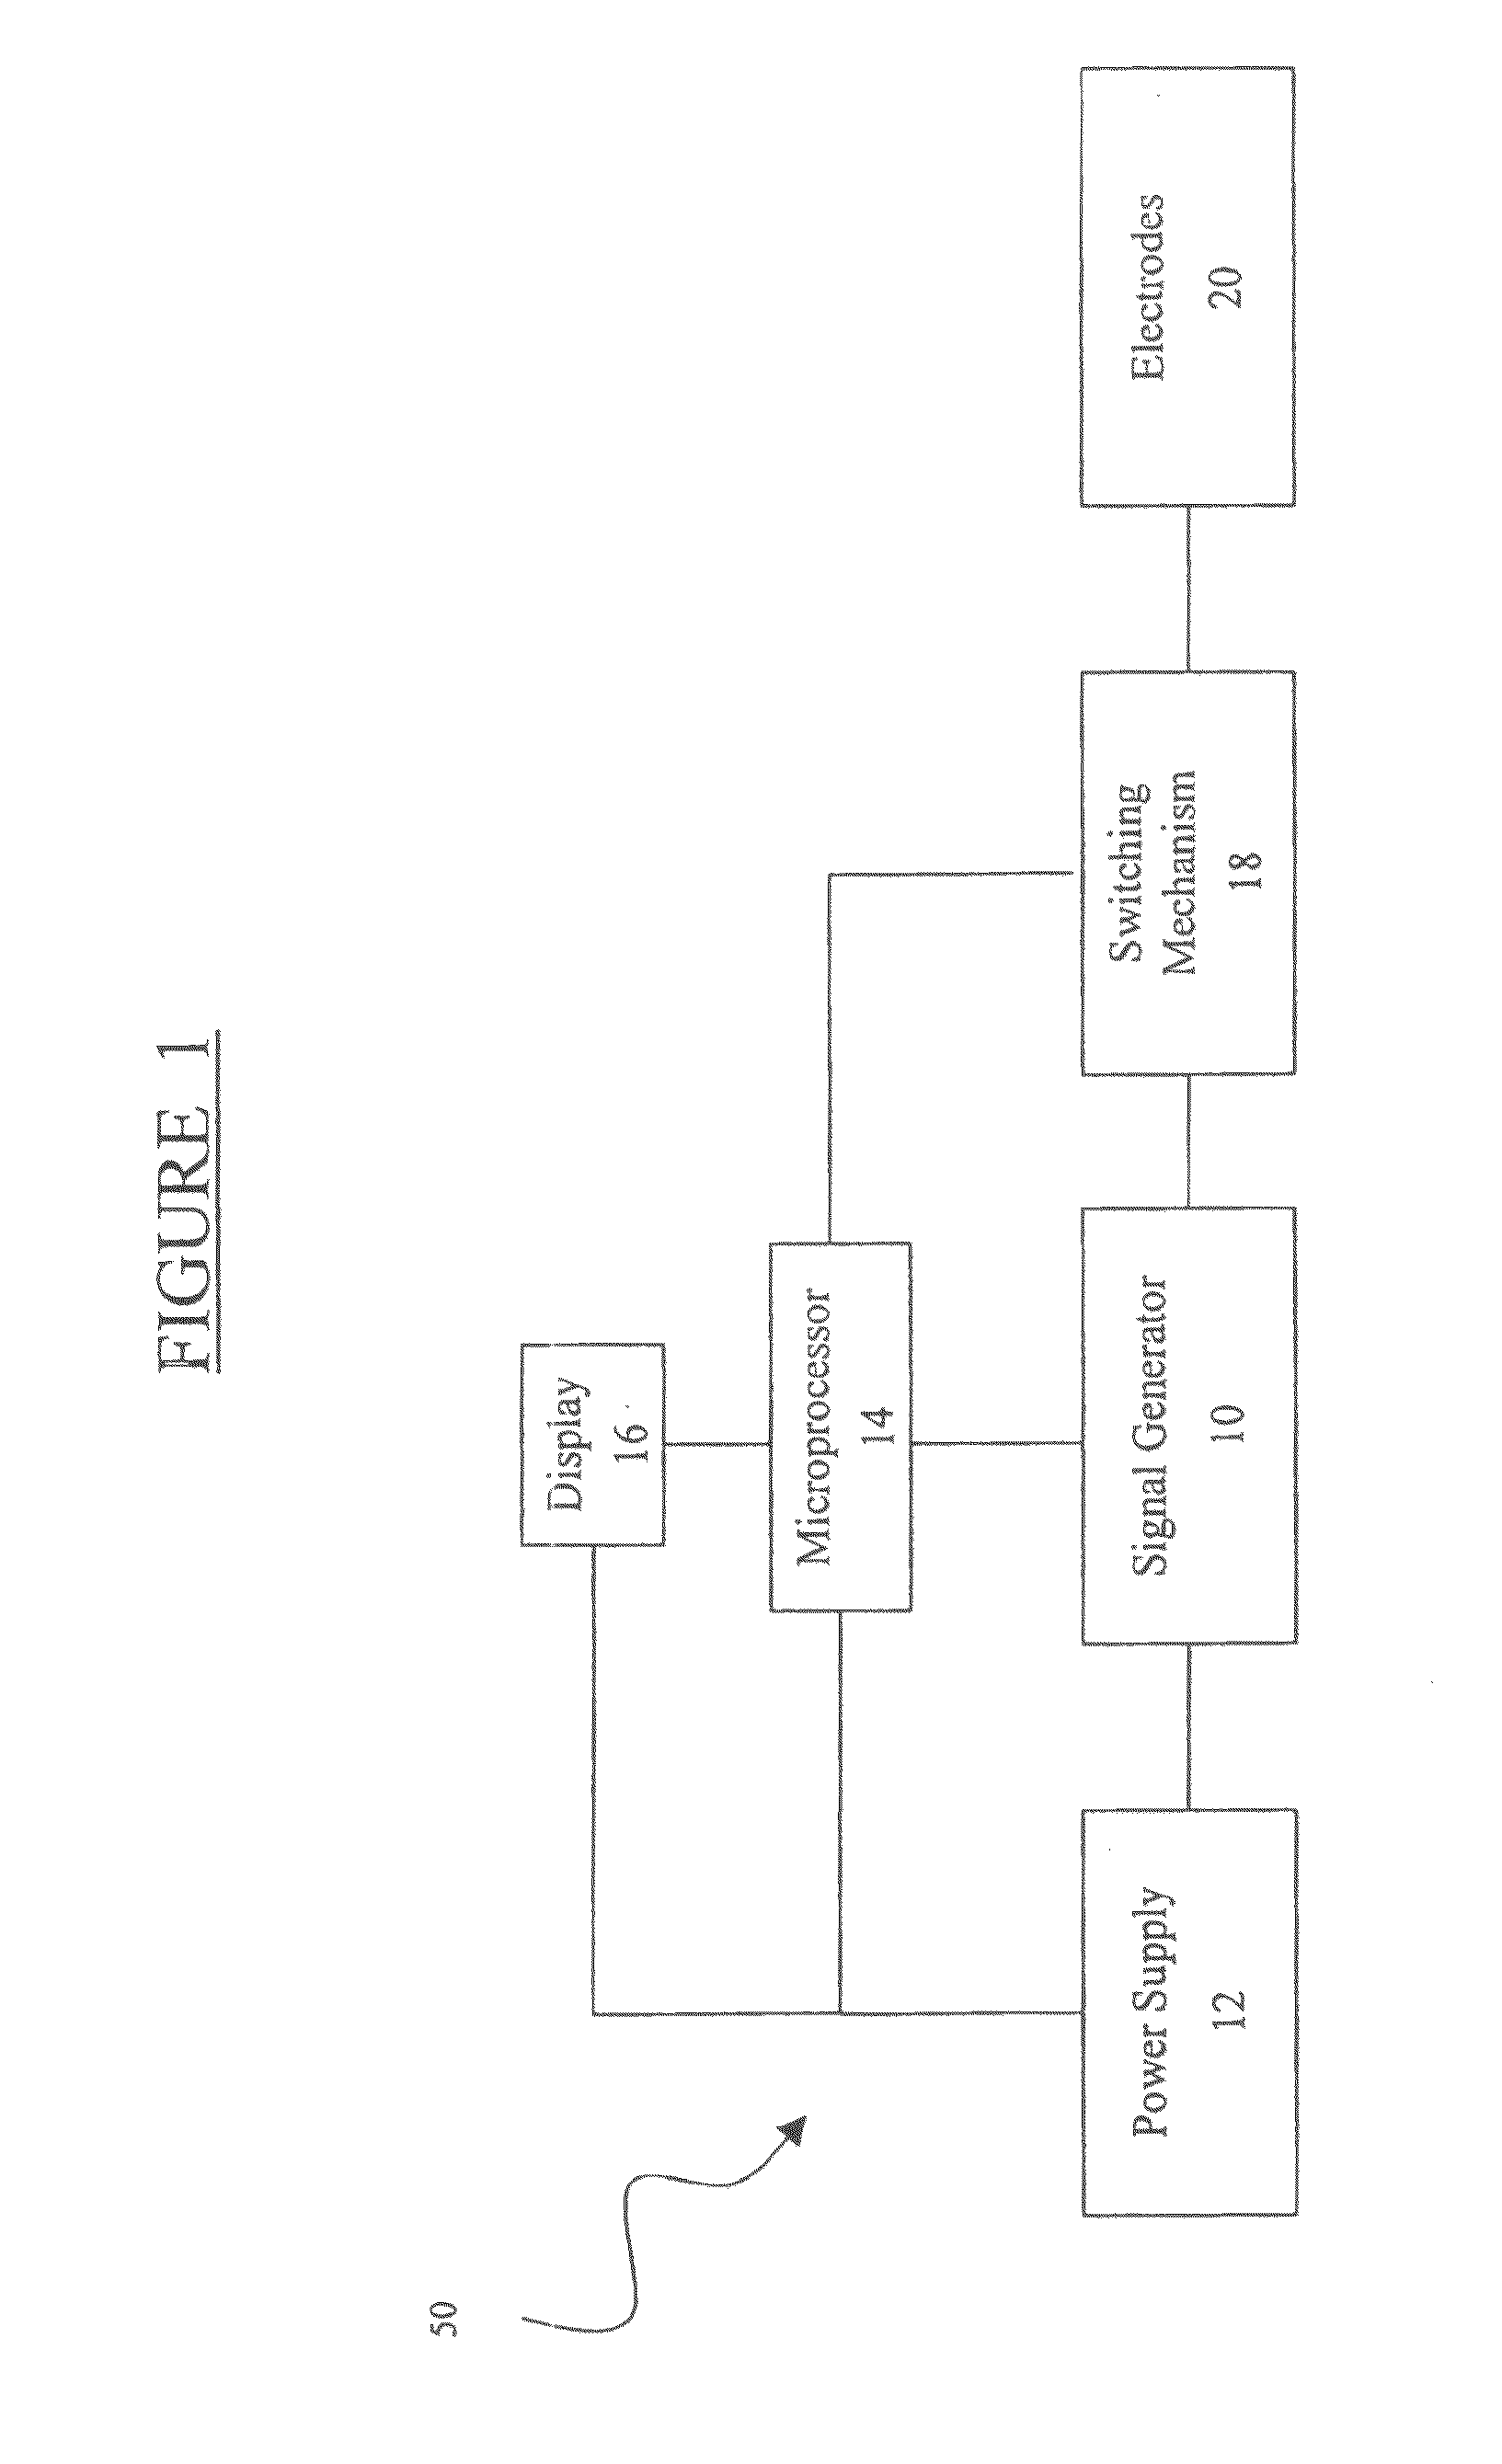 Method and Device for Enhanced Blood Flow